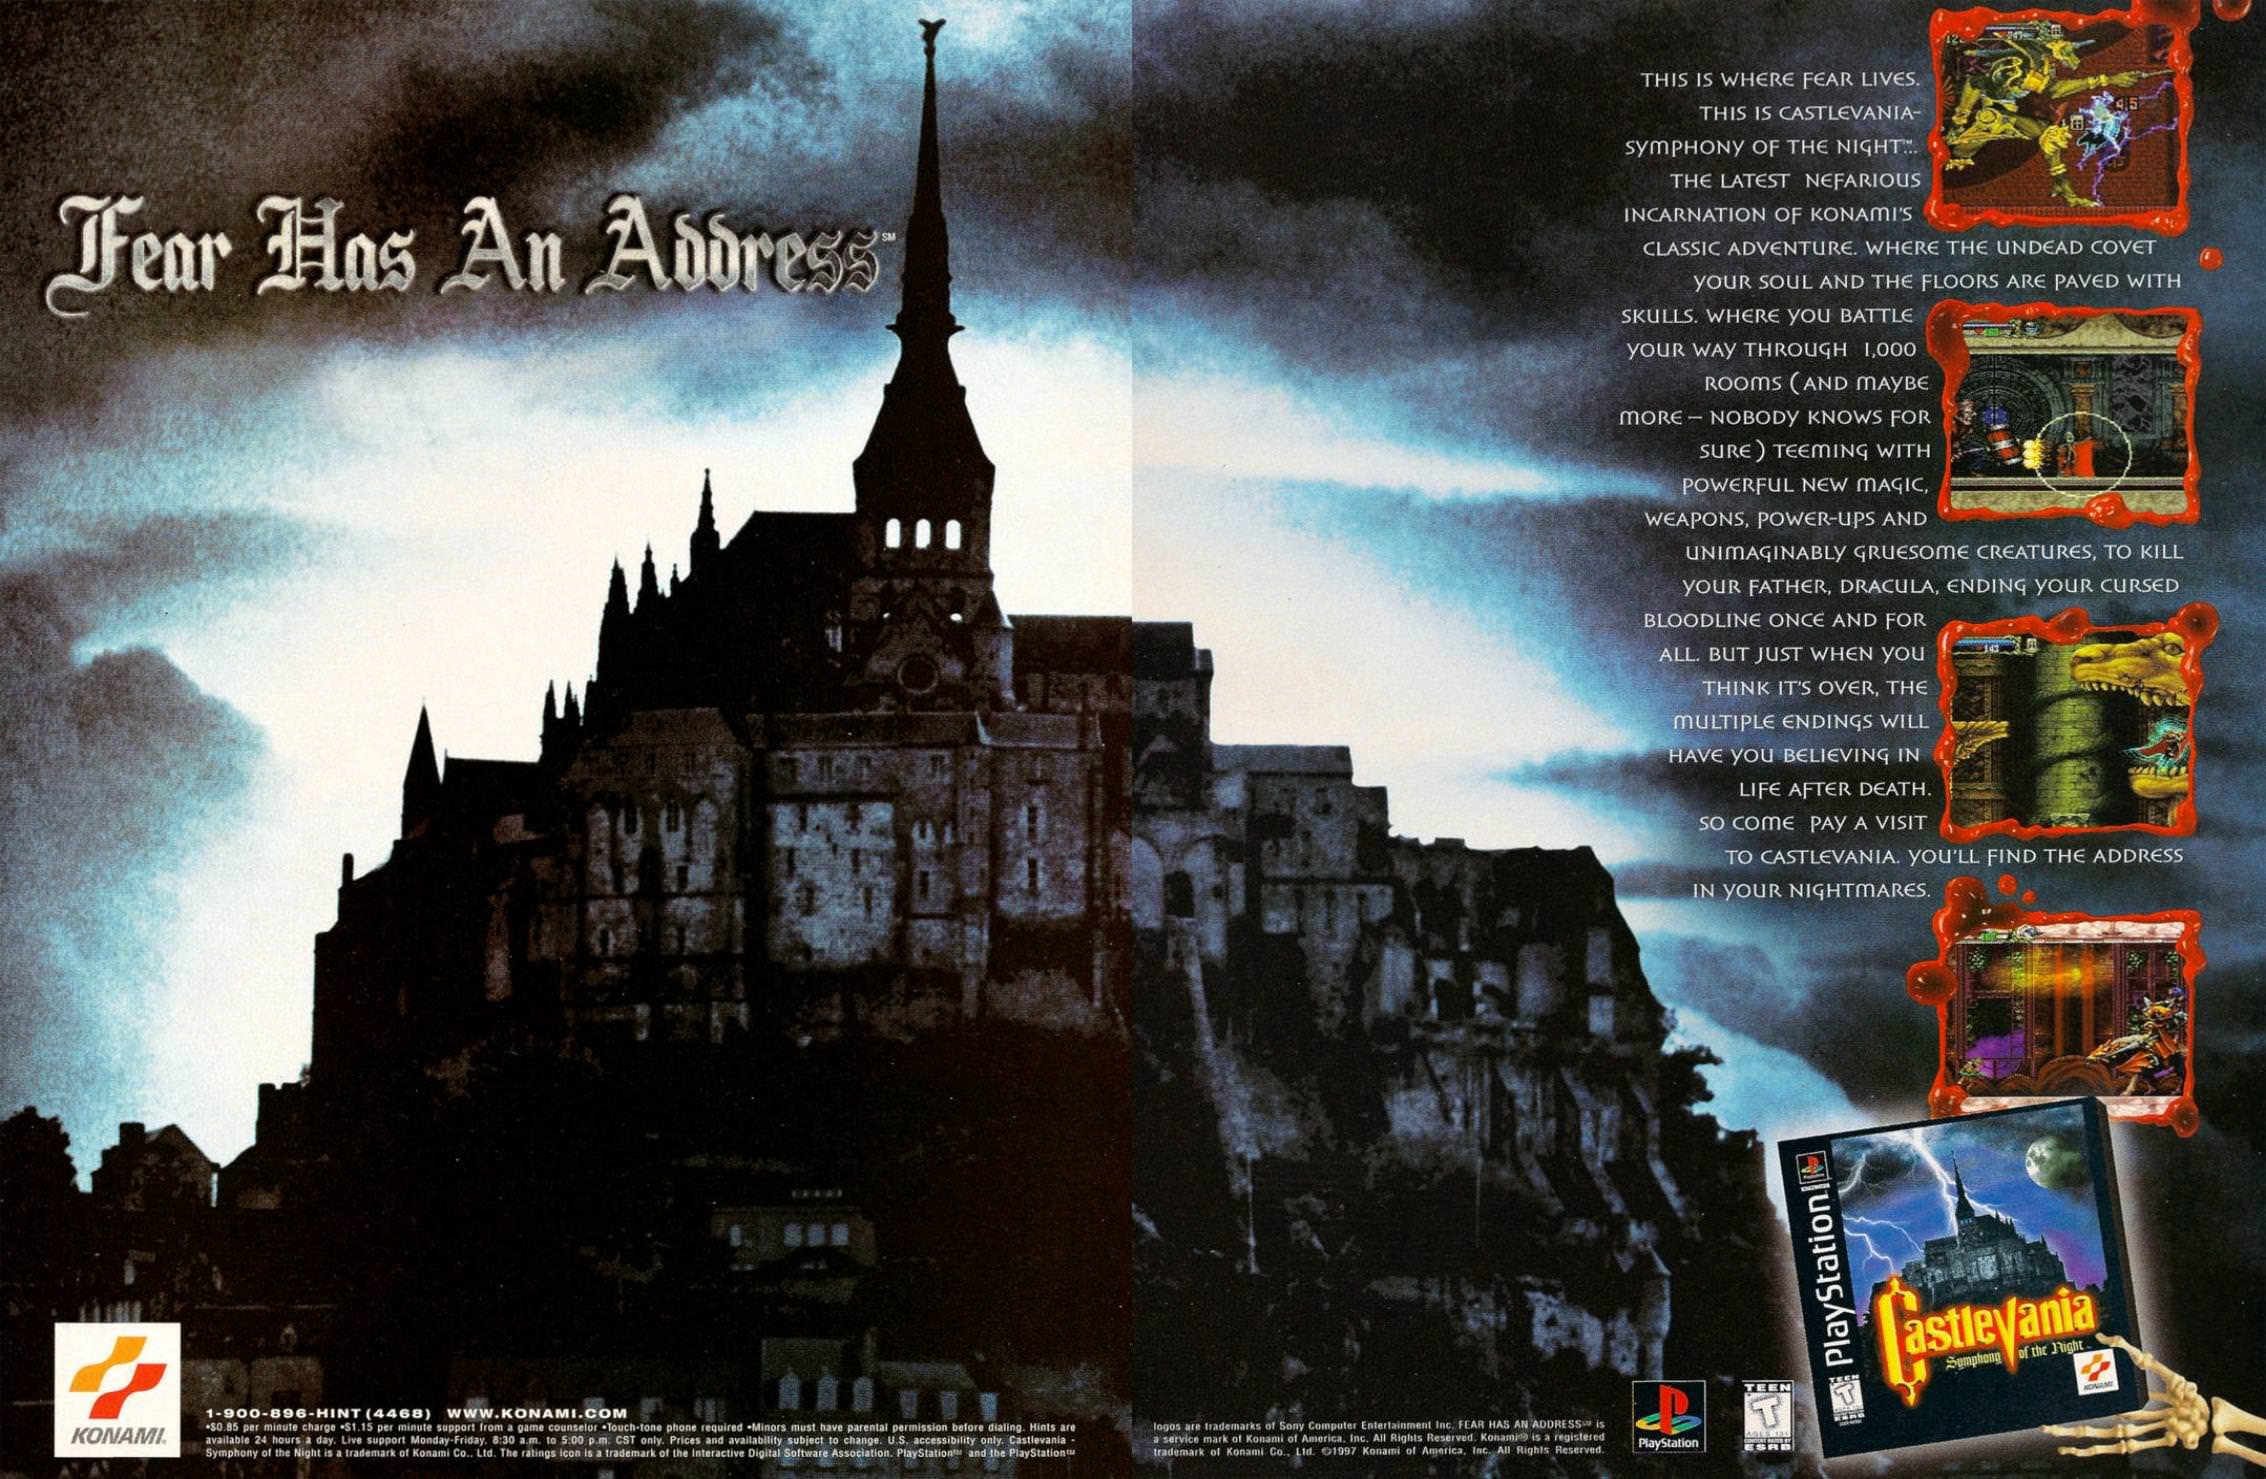 90s video game ads -  mont saint-michel - Fear Has An Address Nomaan Ardue Come hay mga Par This Is Where Pear Lives This Is Castlevania Symphony Of The Night The Latest Nefarious Incarnation Of Konais Classic Adventure Where The Undead Covet Your Soul An